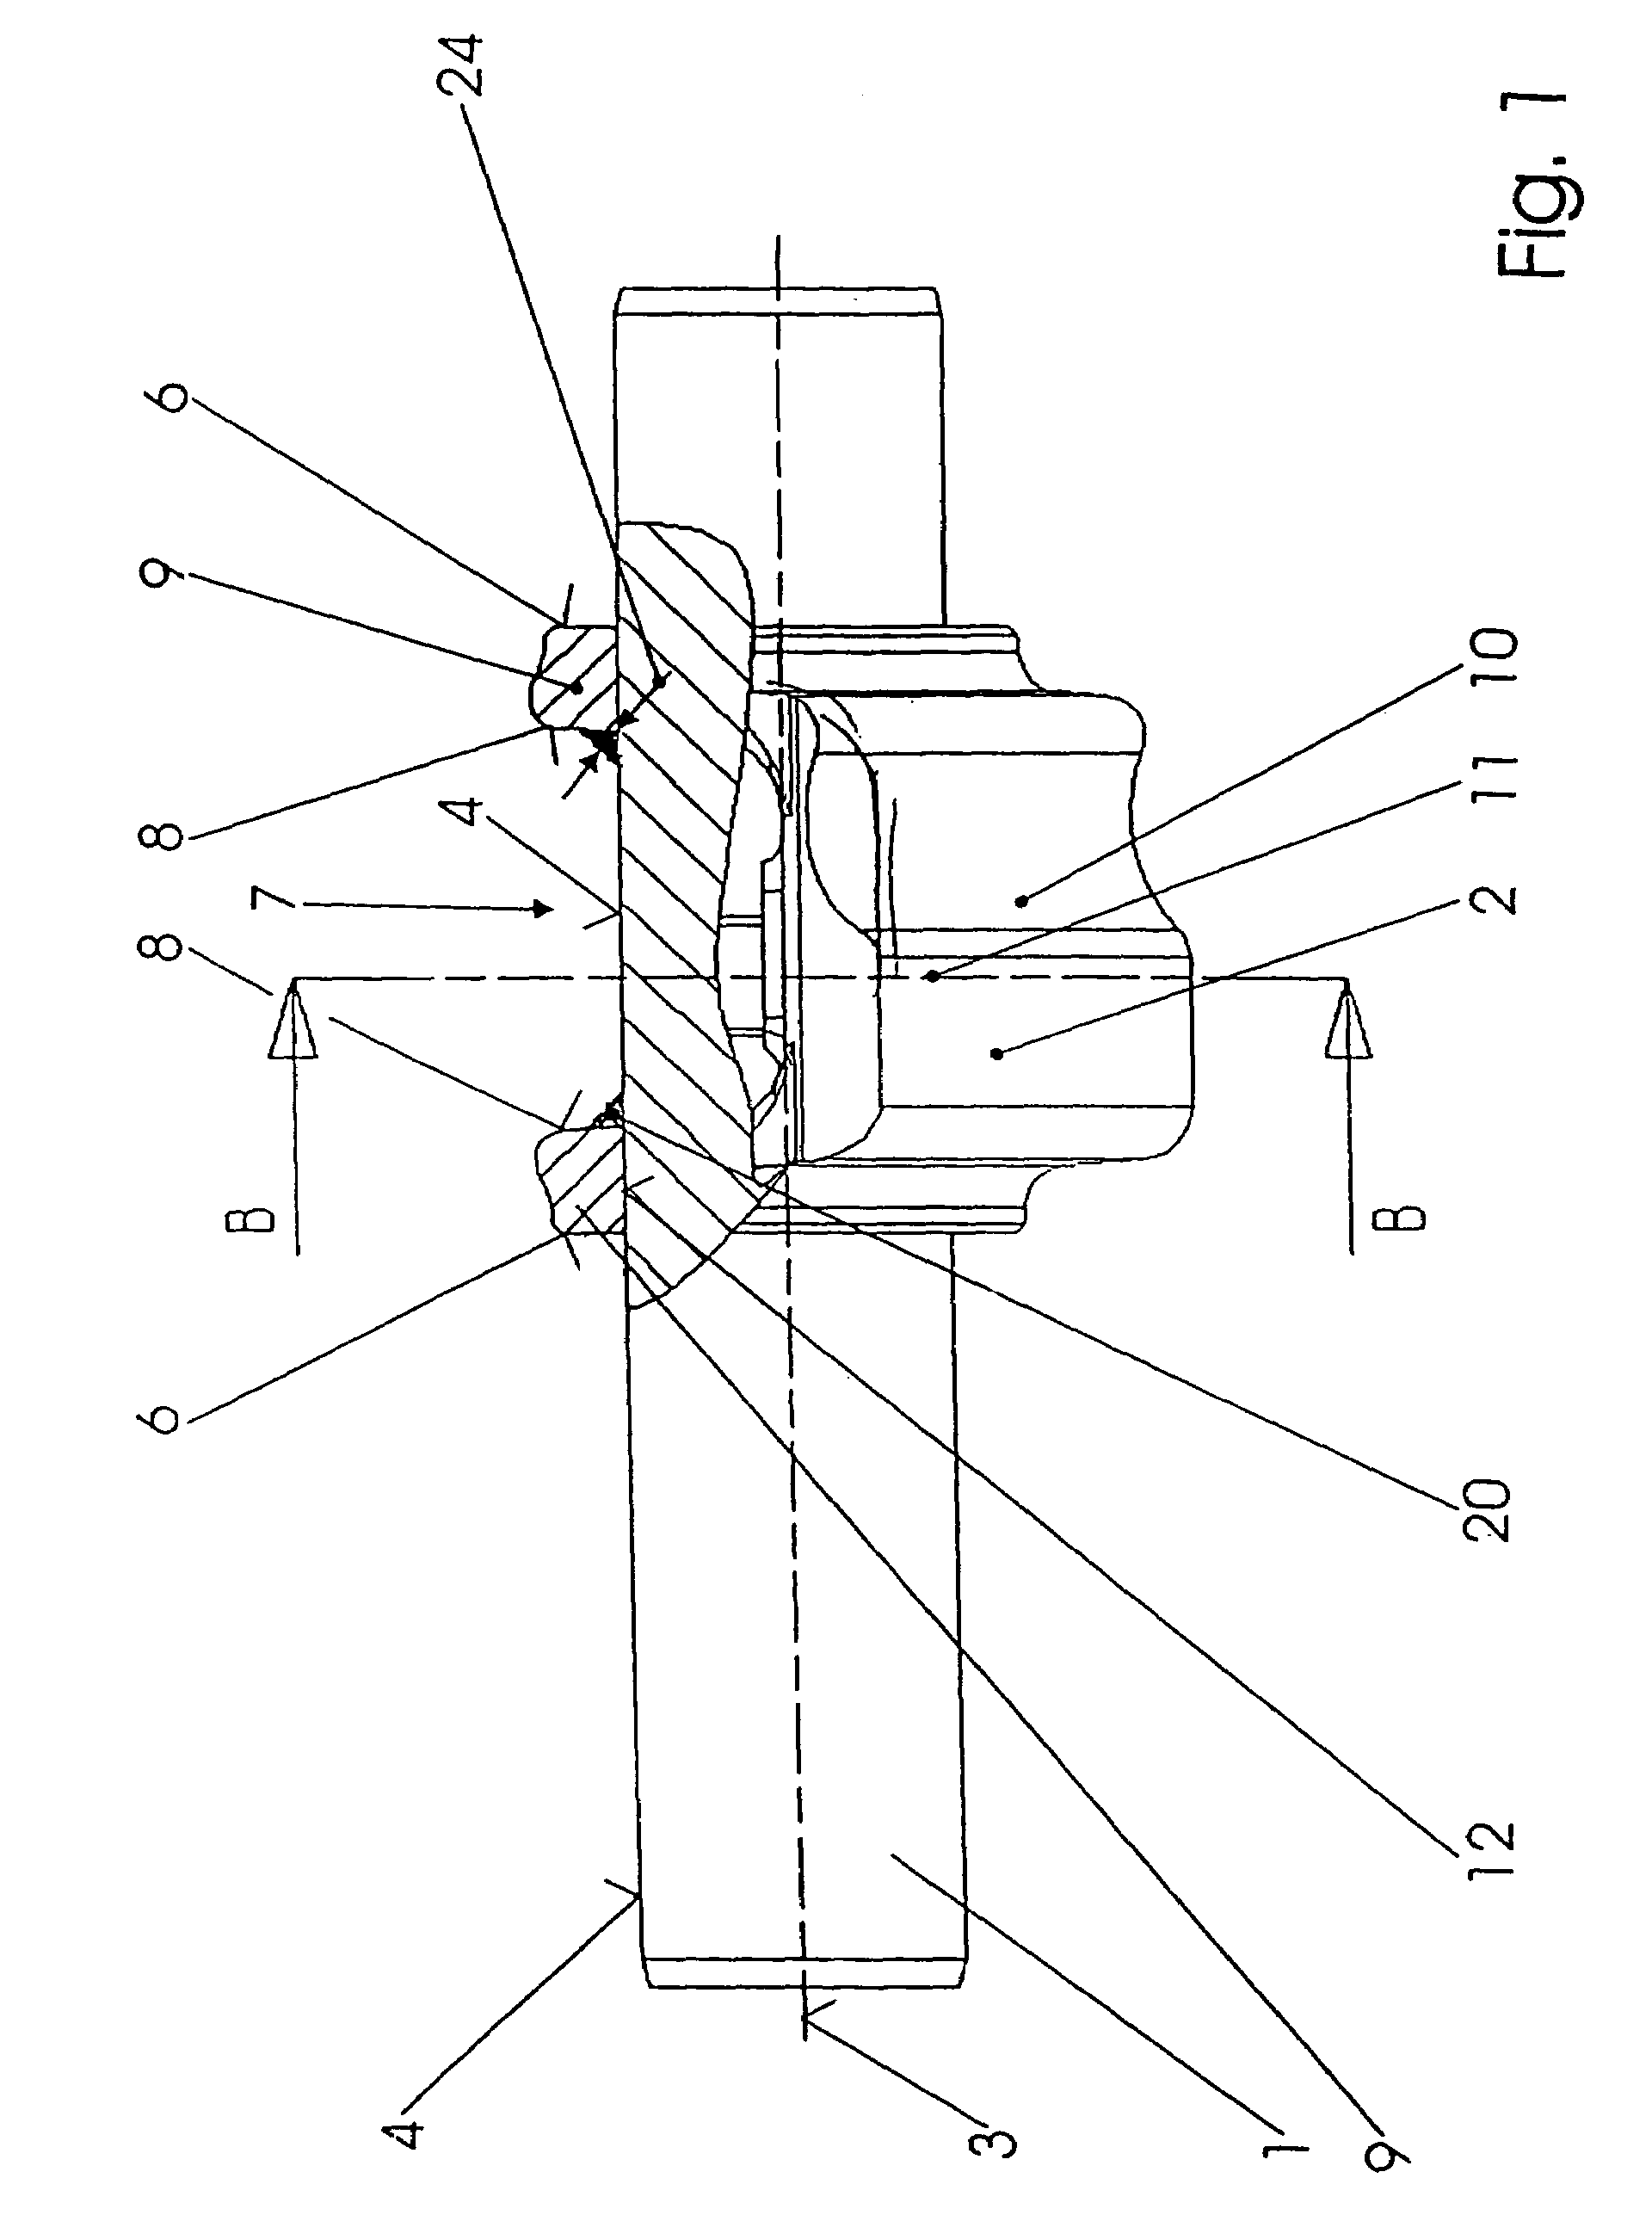 Shaft comprising a part connected thereto by welding